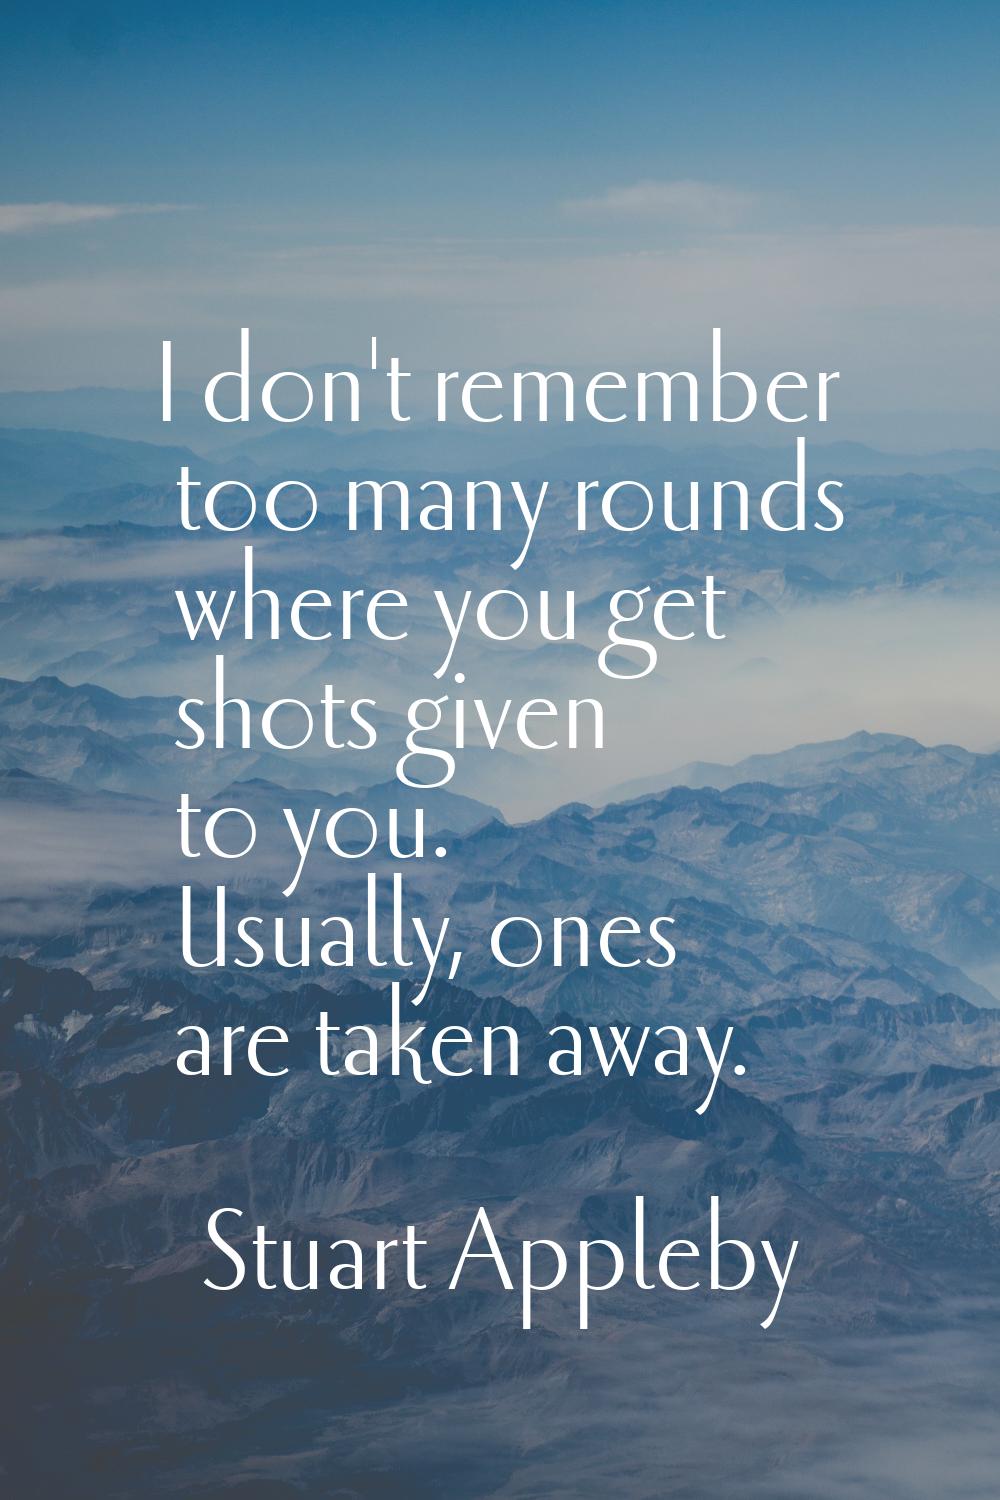 I don't remember too many rounds where you get shots given to you. Usually, ones are taken away.